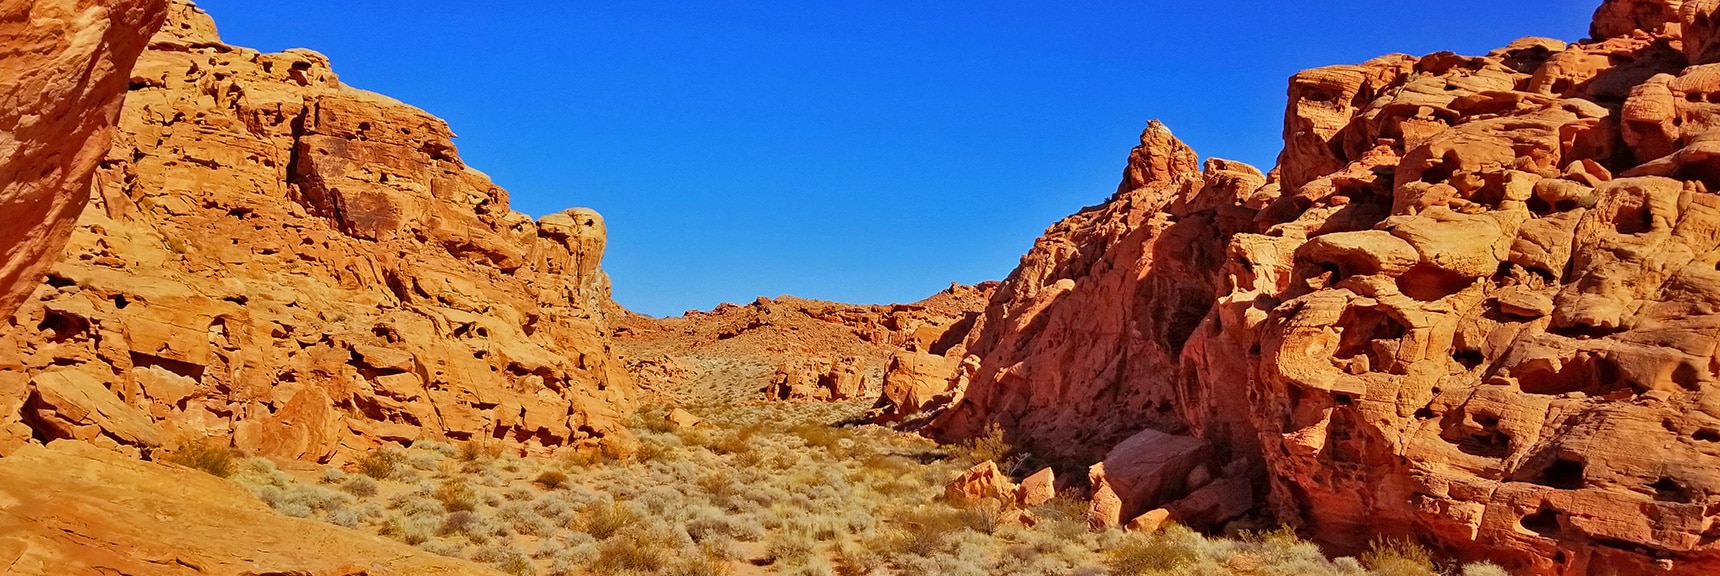 Imagine Pteranodons Soaring the Skies | Bowl of Fire, Lake Mead National Recreation Area, Nevada